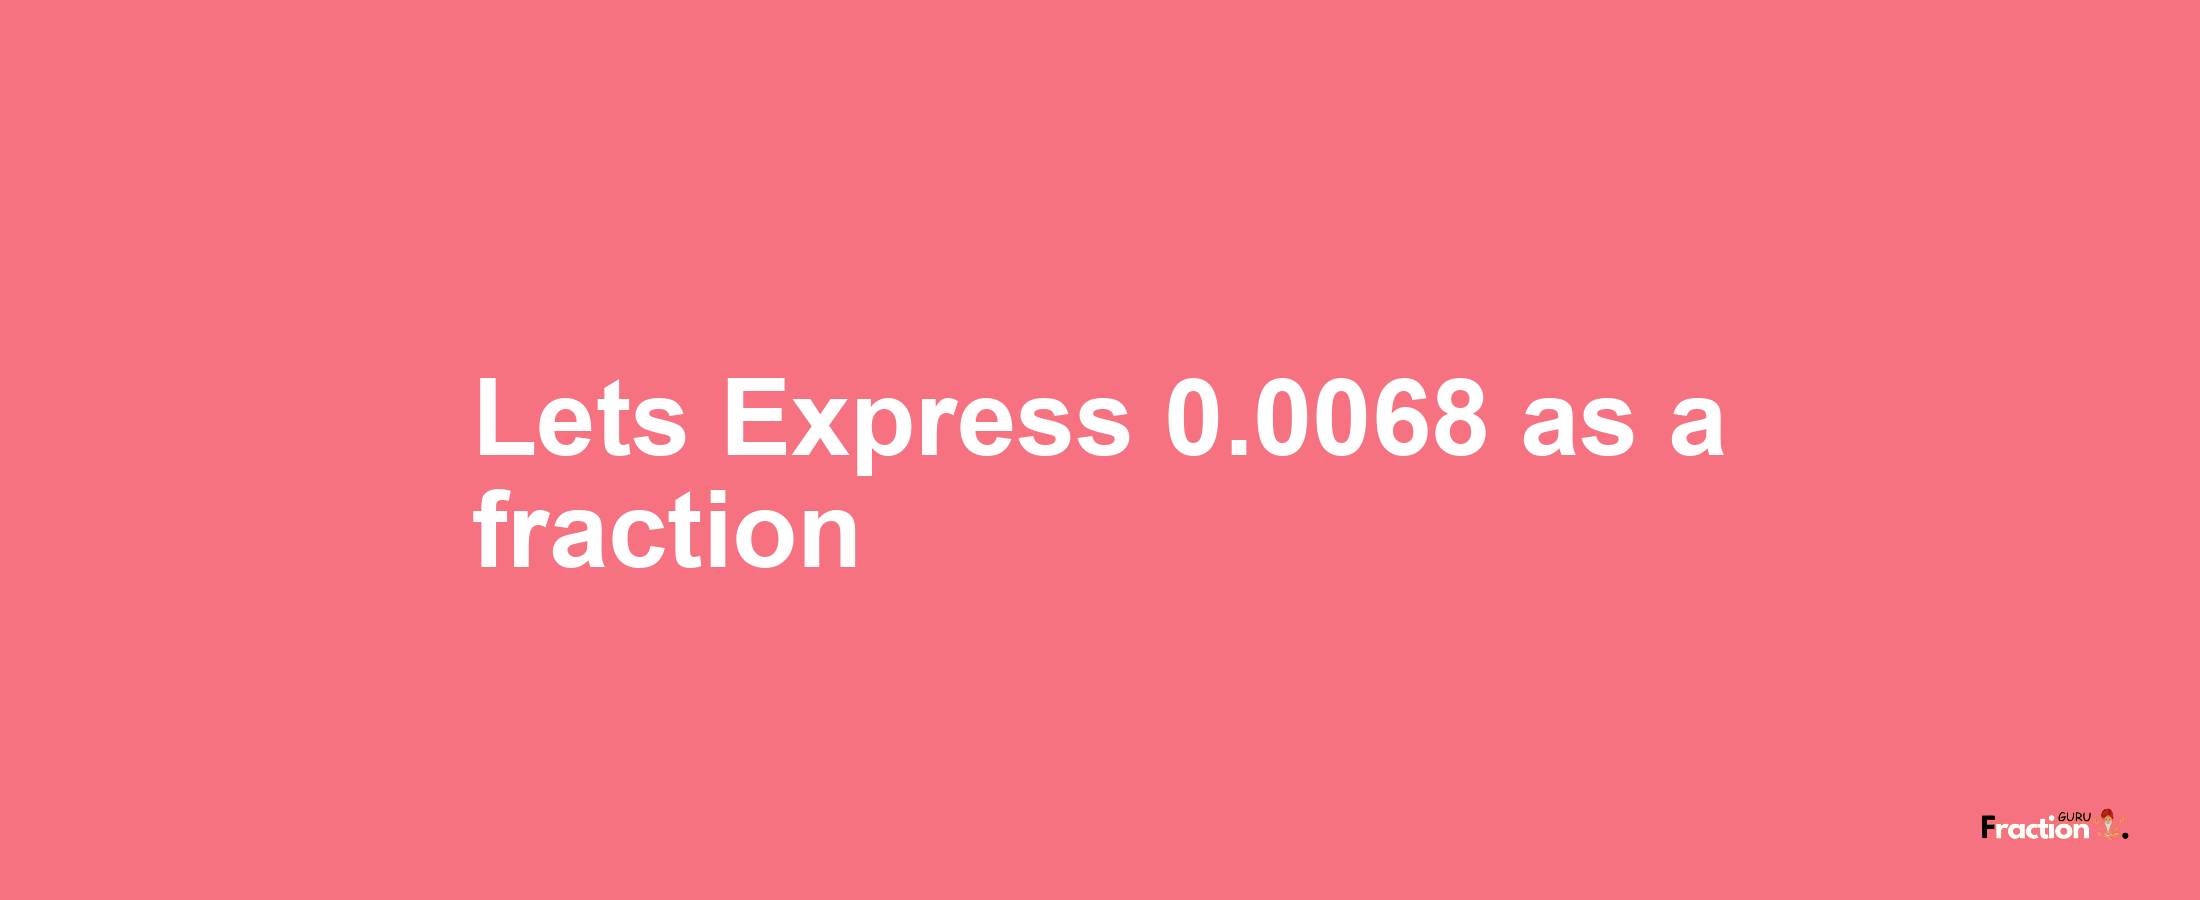 Lets Express 0.0068 as afraction